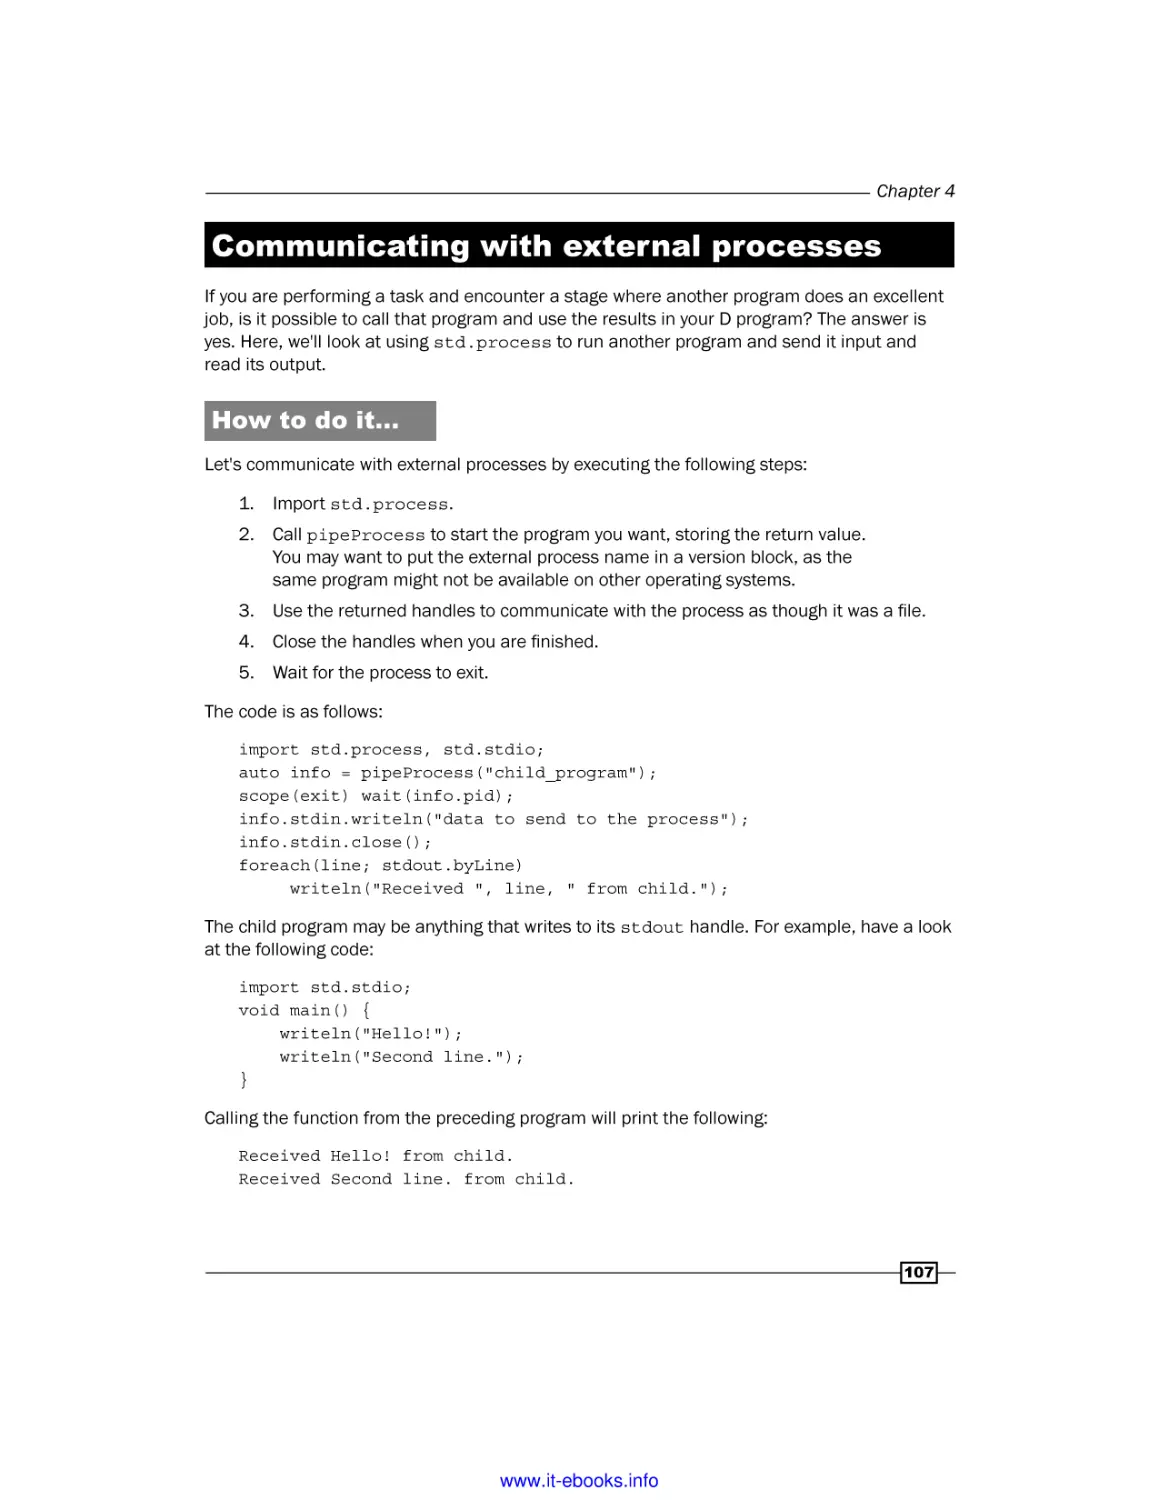 Communicating with external processes